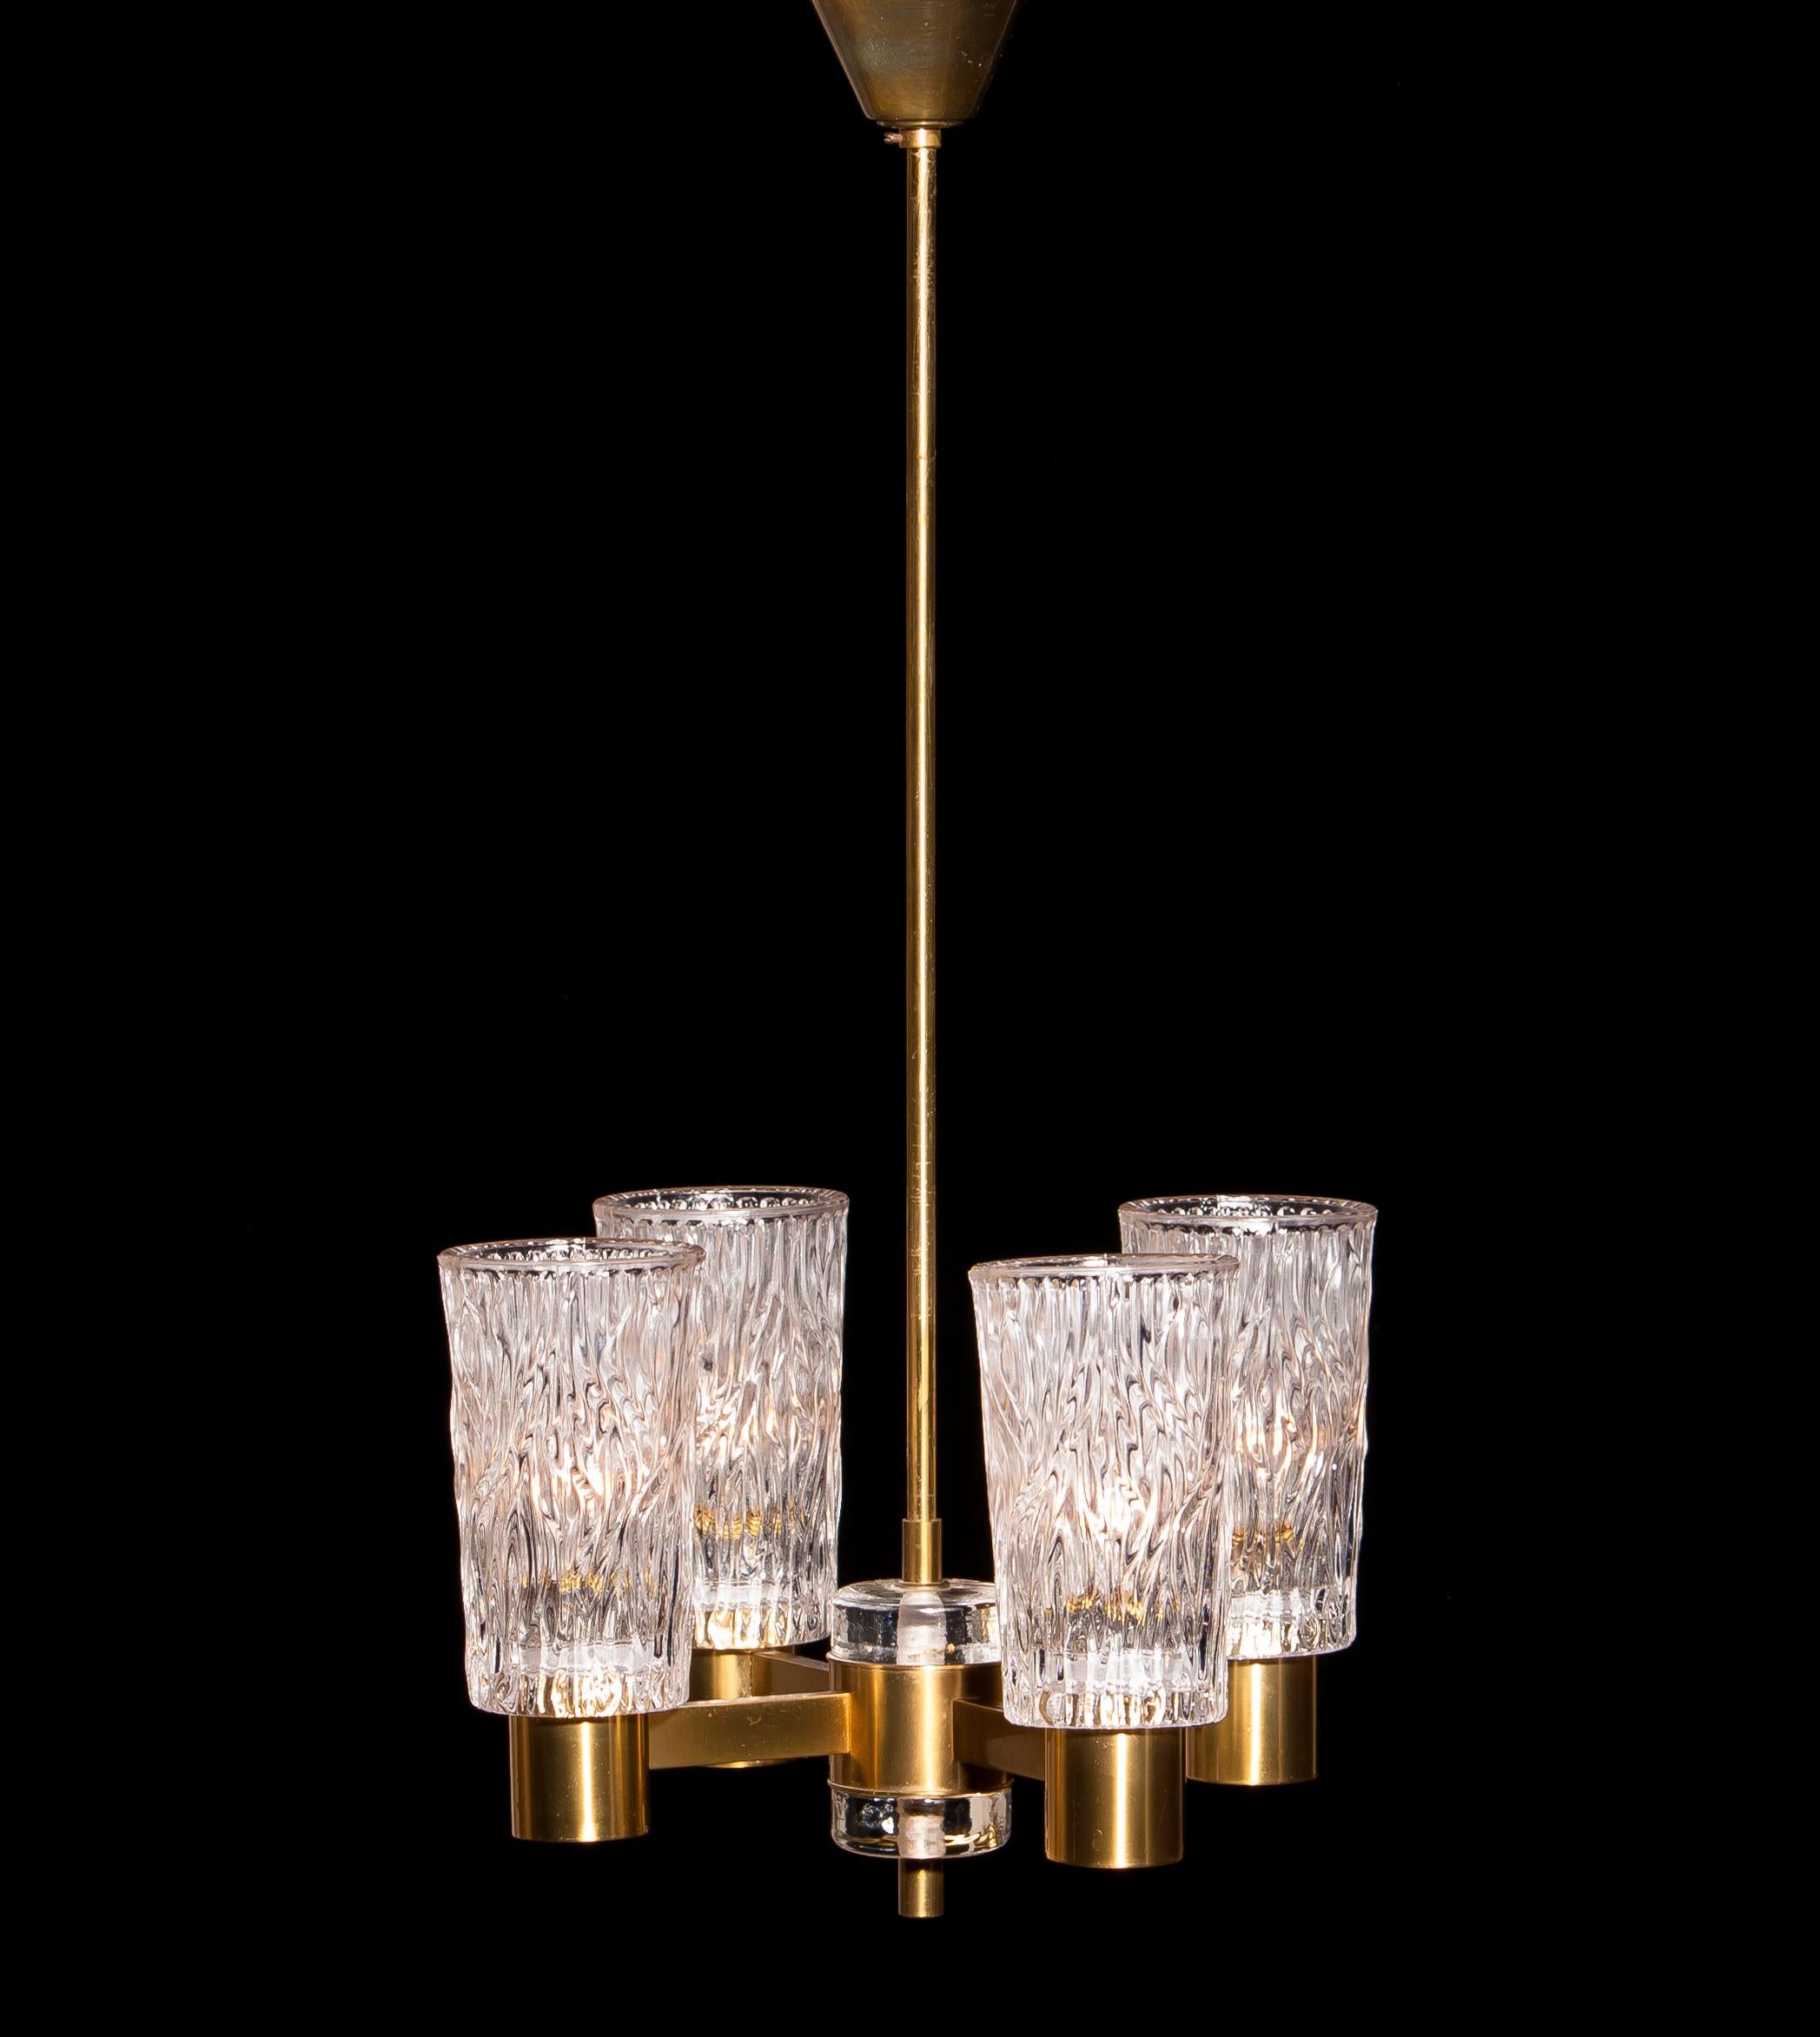 Beautiful chandelier made by Orrefors Sweden.
This lamp is made of brass with four clear crystal glass shades.
It is in a lovely condition.
Period 1950s.
Dimensions: H 65 cm, ø 35 cm.